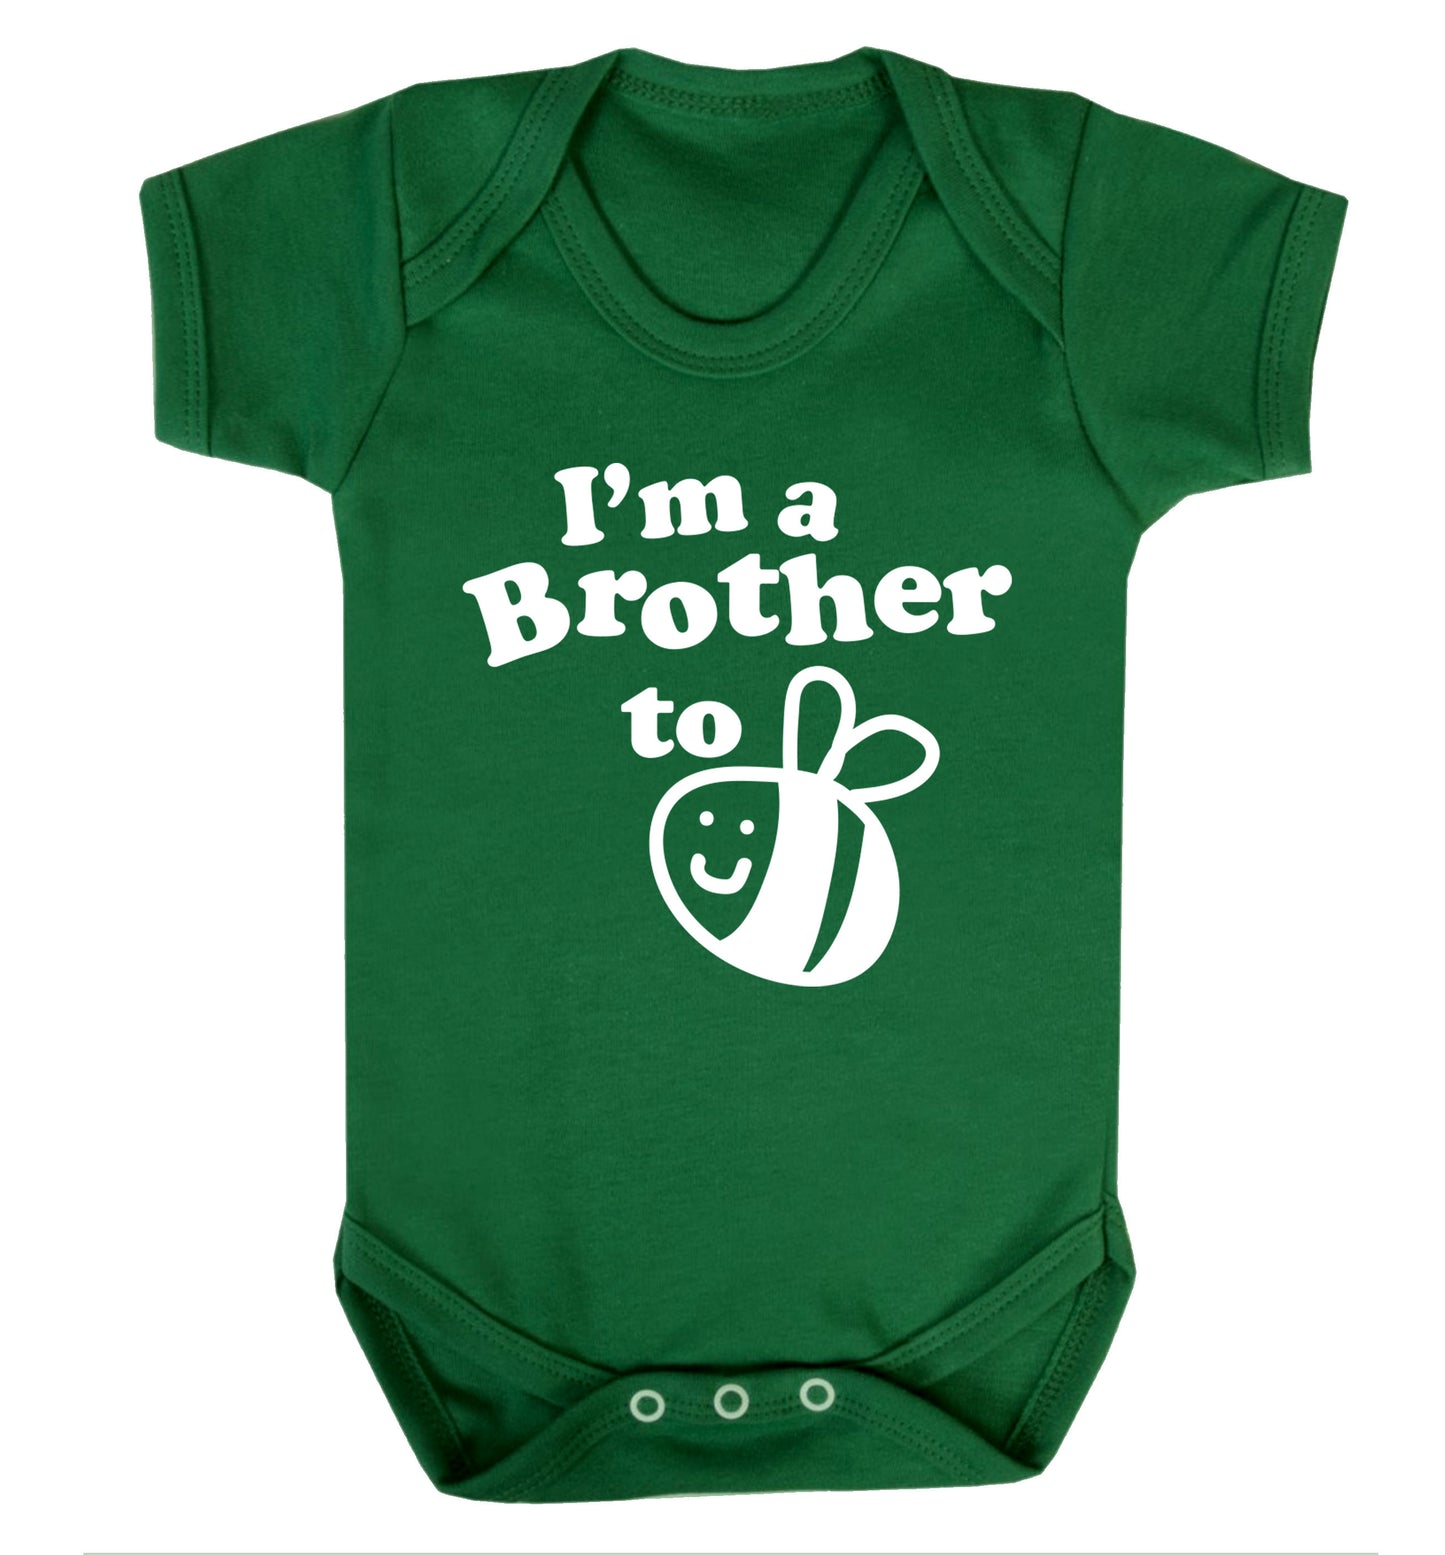 I'm a brother to be Baby Vest green 18-24 months